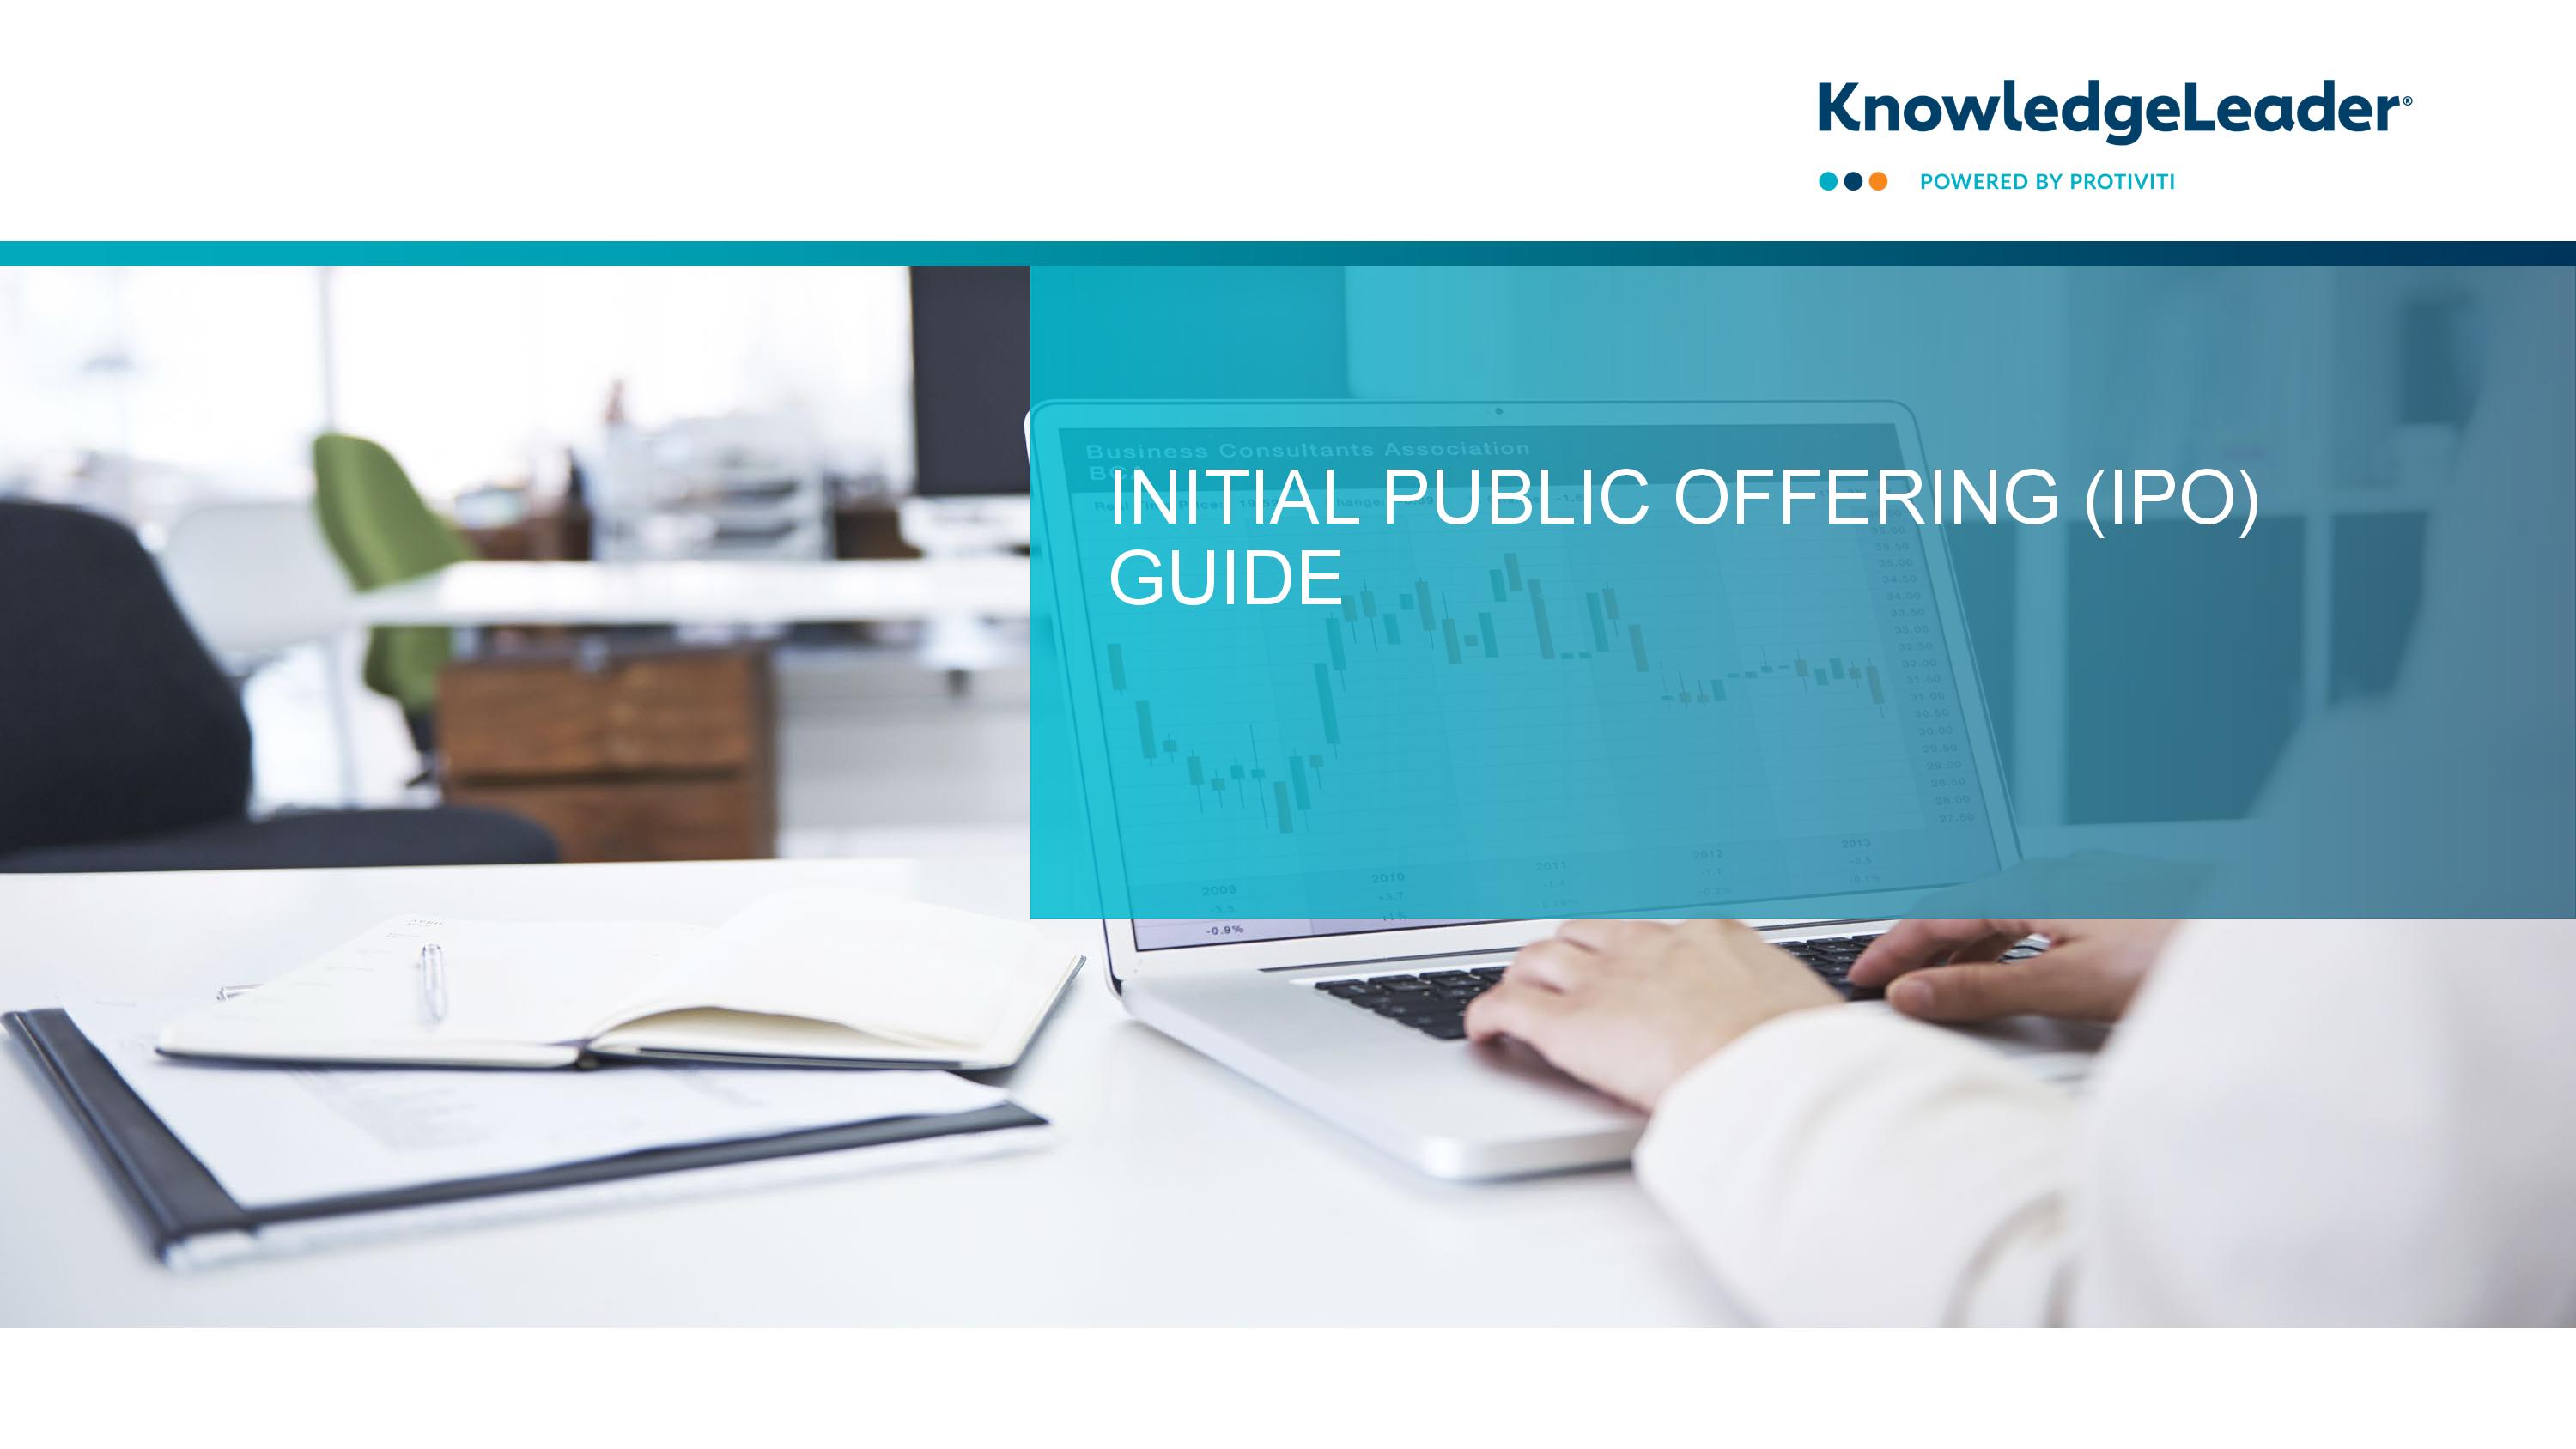 Screenshot of the first page of Initial Public Offering (IPO) Guide